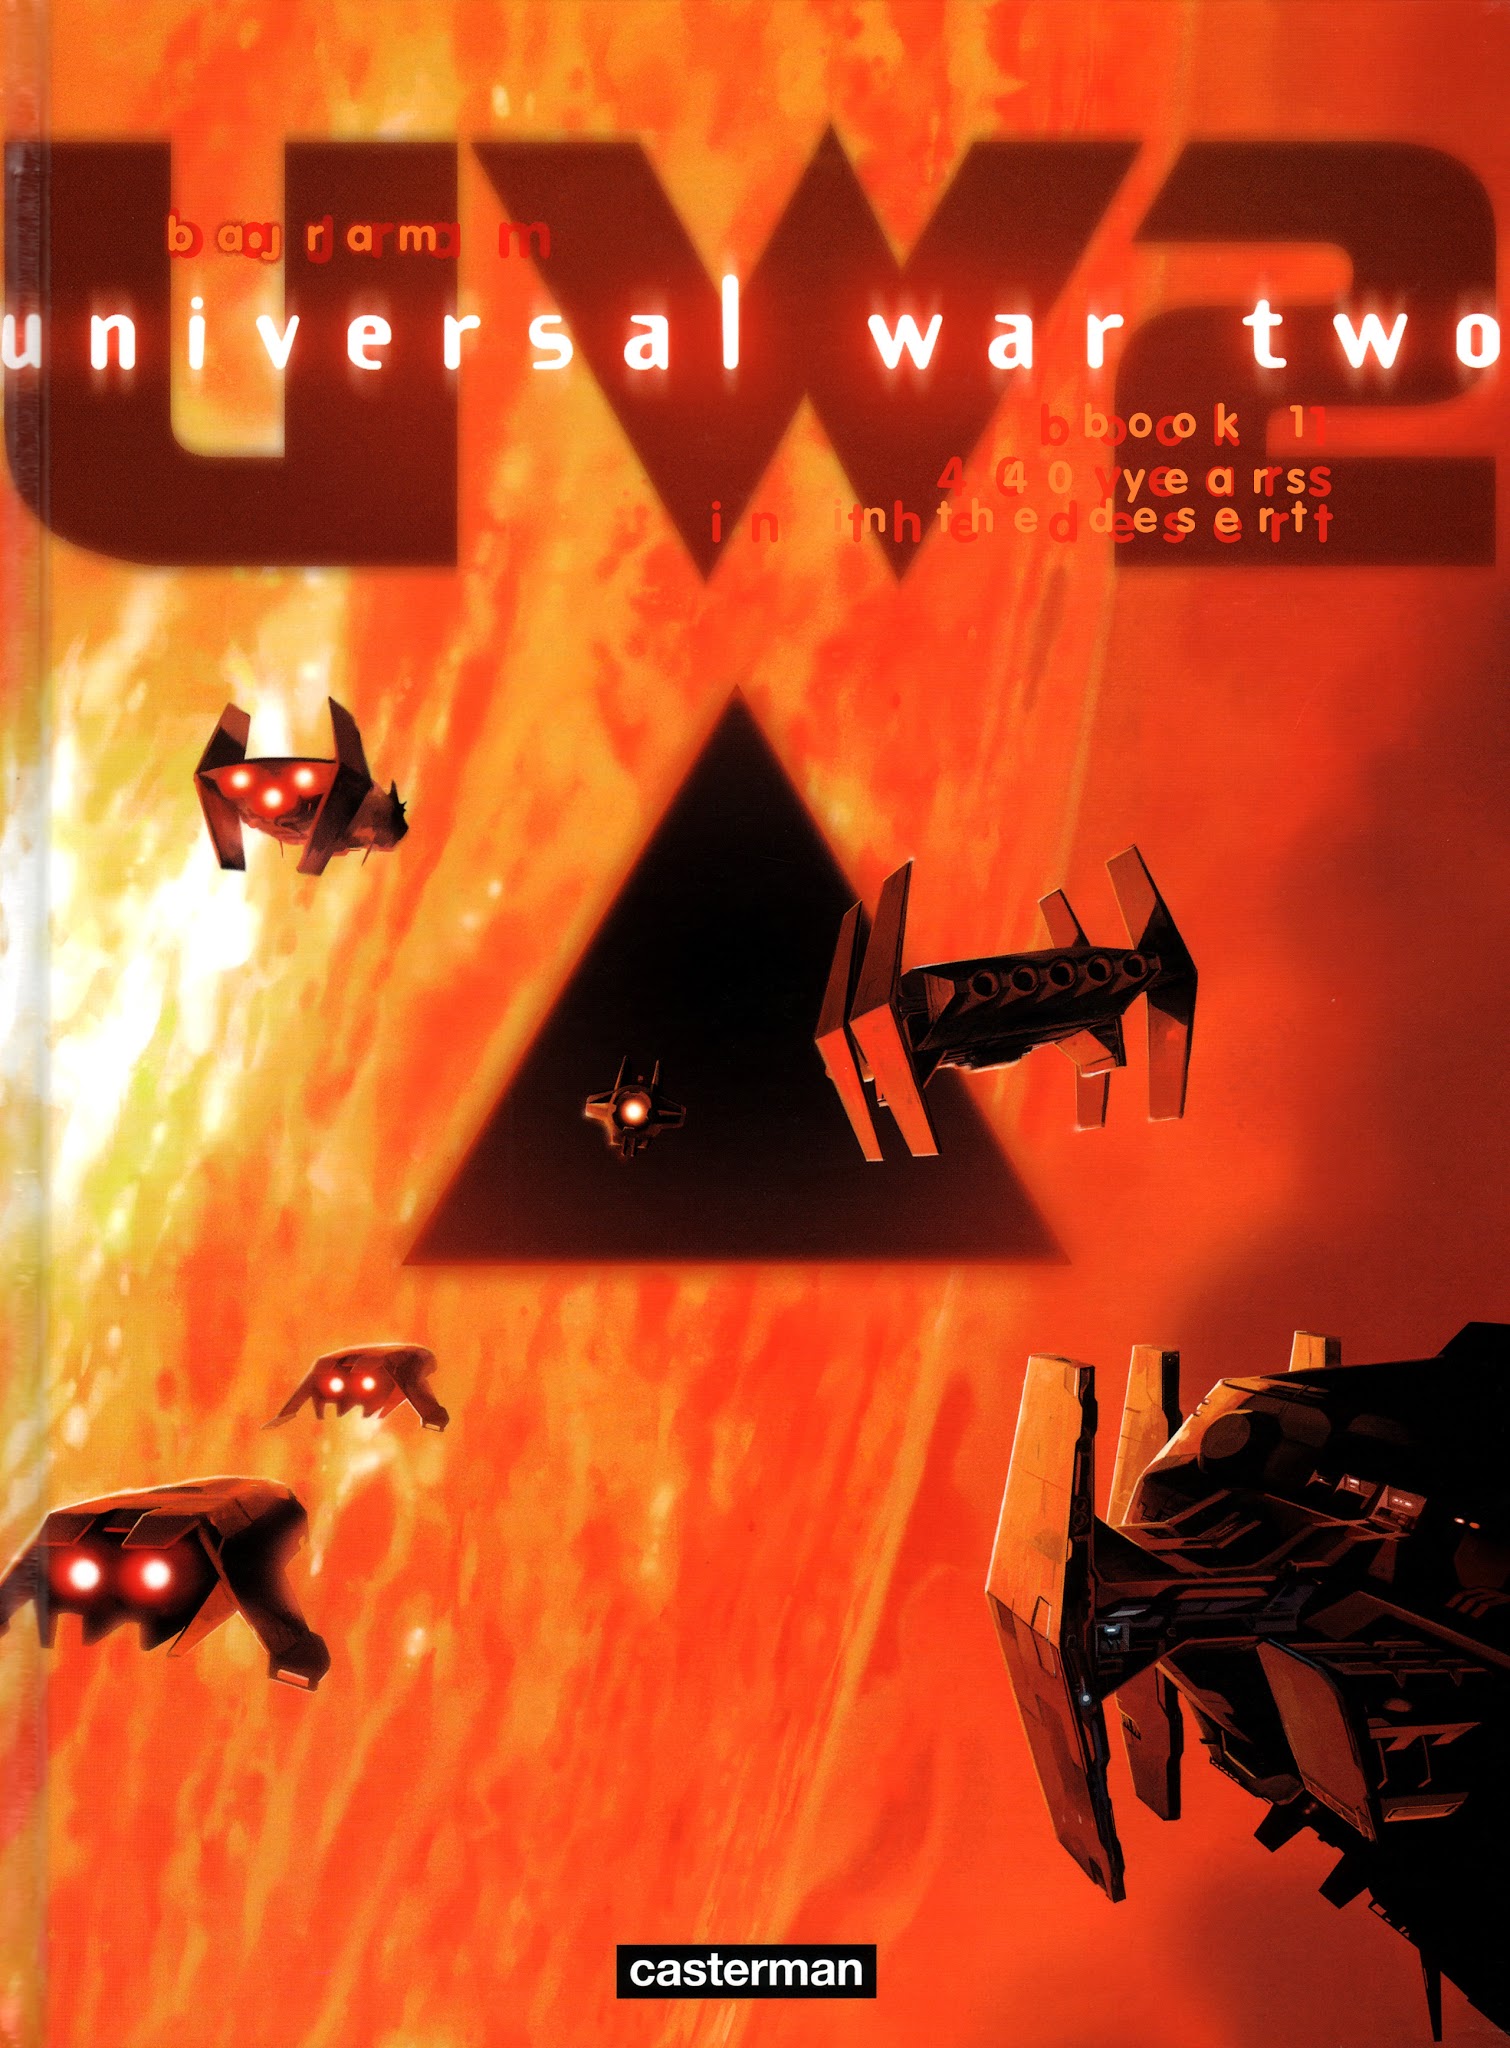 Read online Universal War Two comic -  Issue #1 - 1